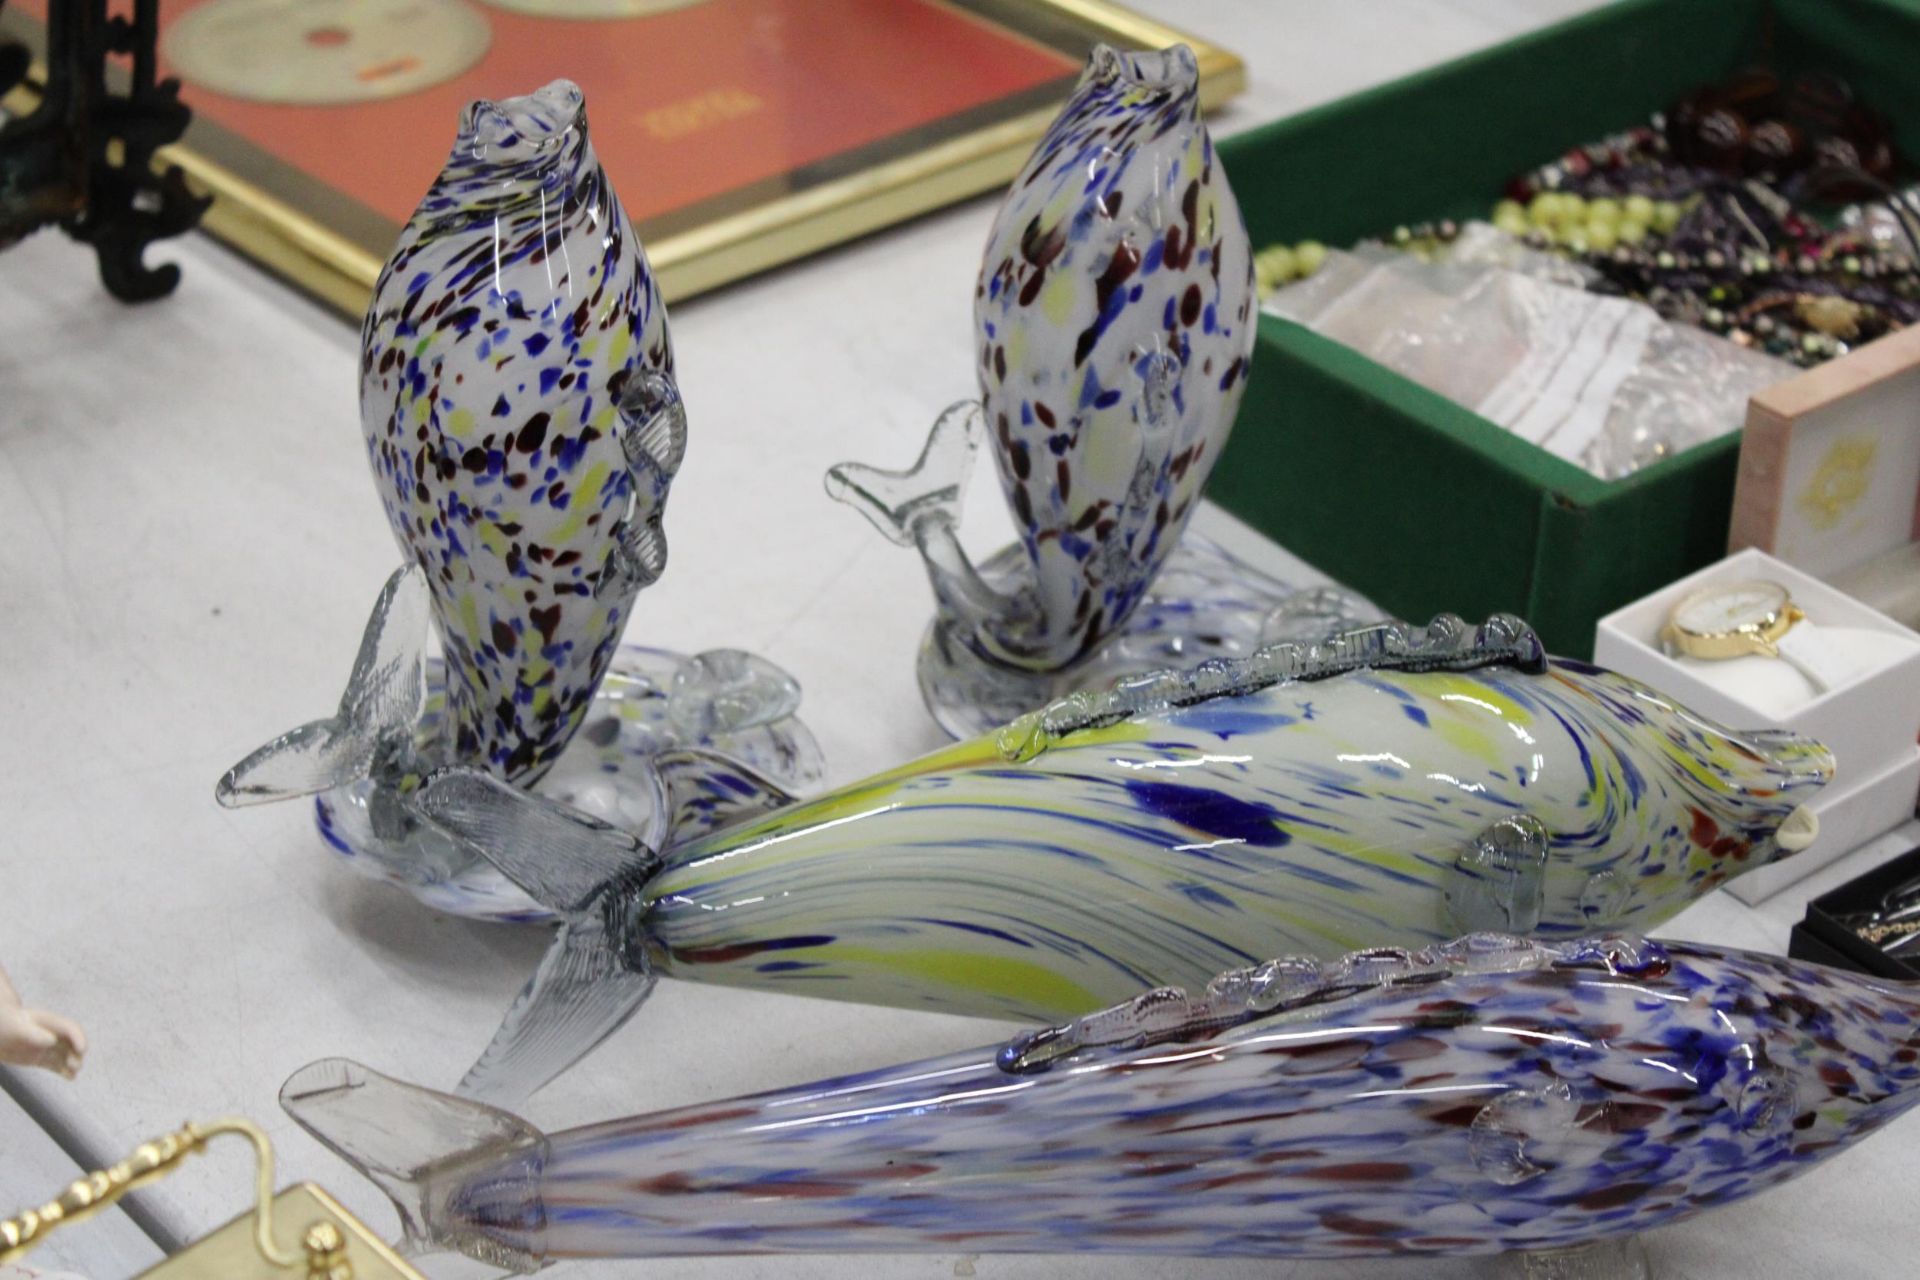 FOUR LARGE MURANO STYLE GLASS FISHES - Image 6 of 6